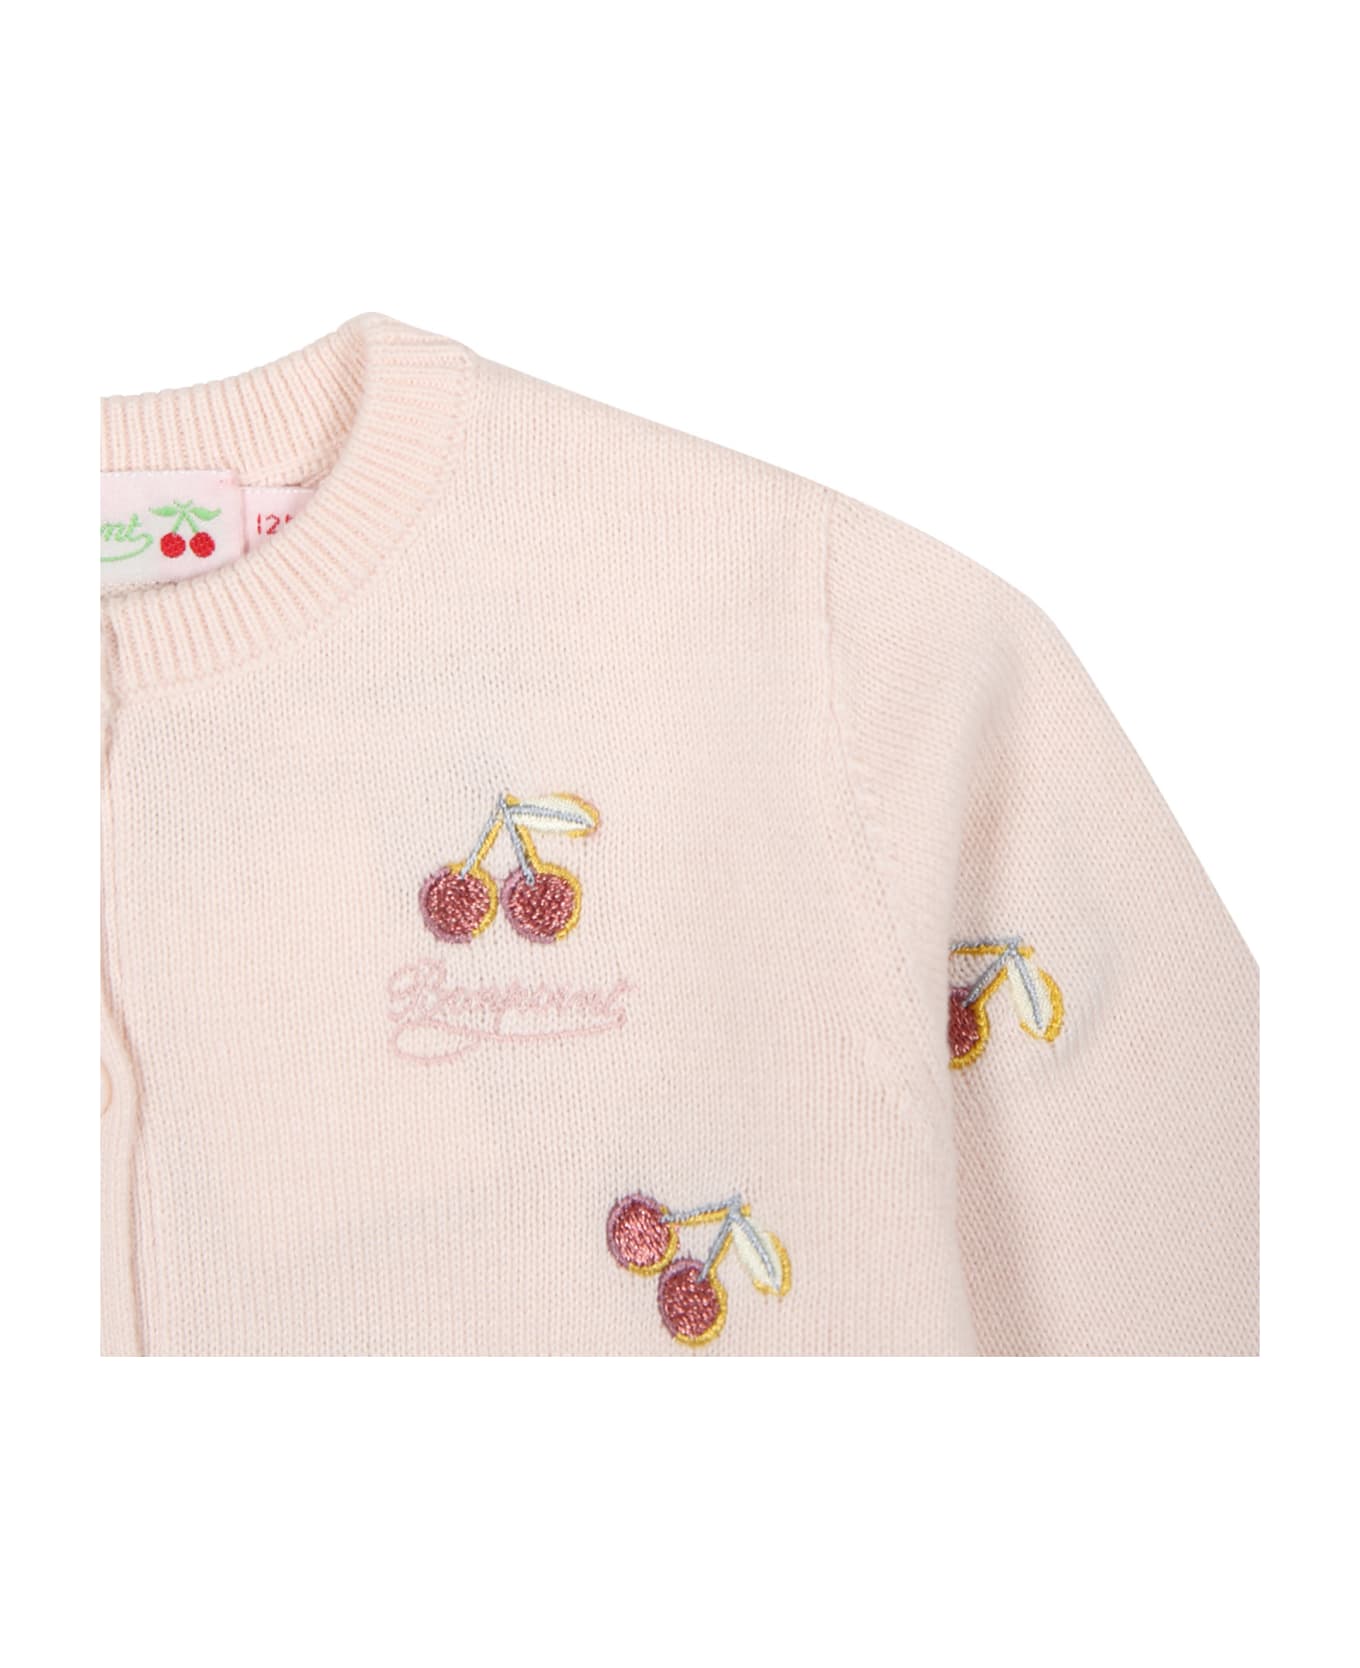 Bonpoint Pink Cardigan For Baby Girl With Cherries - Pink